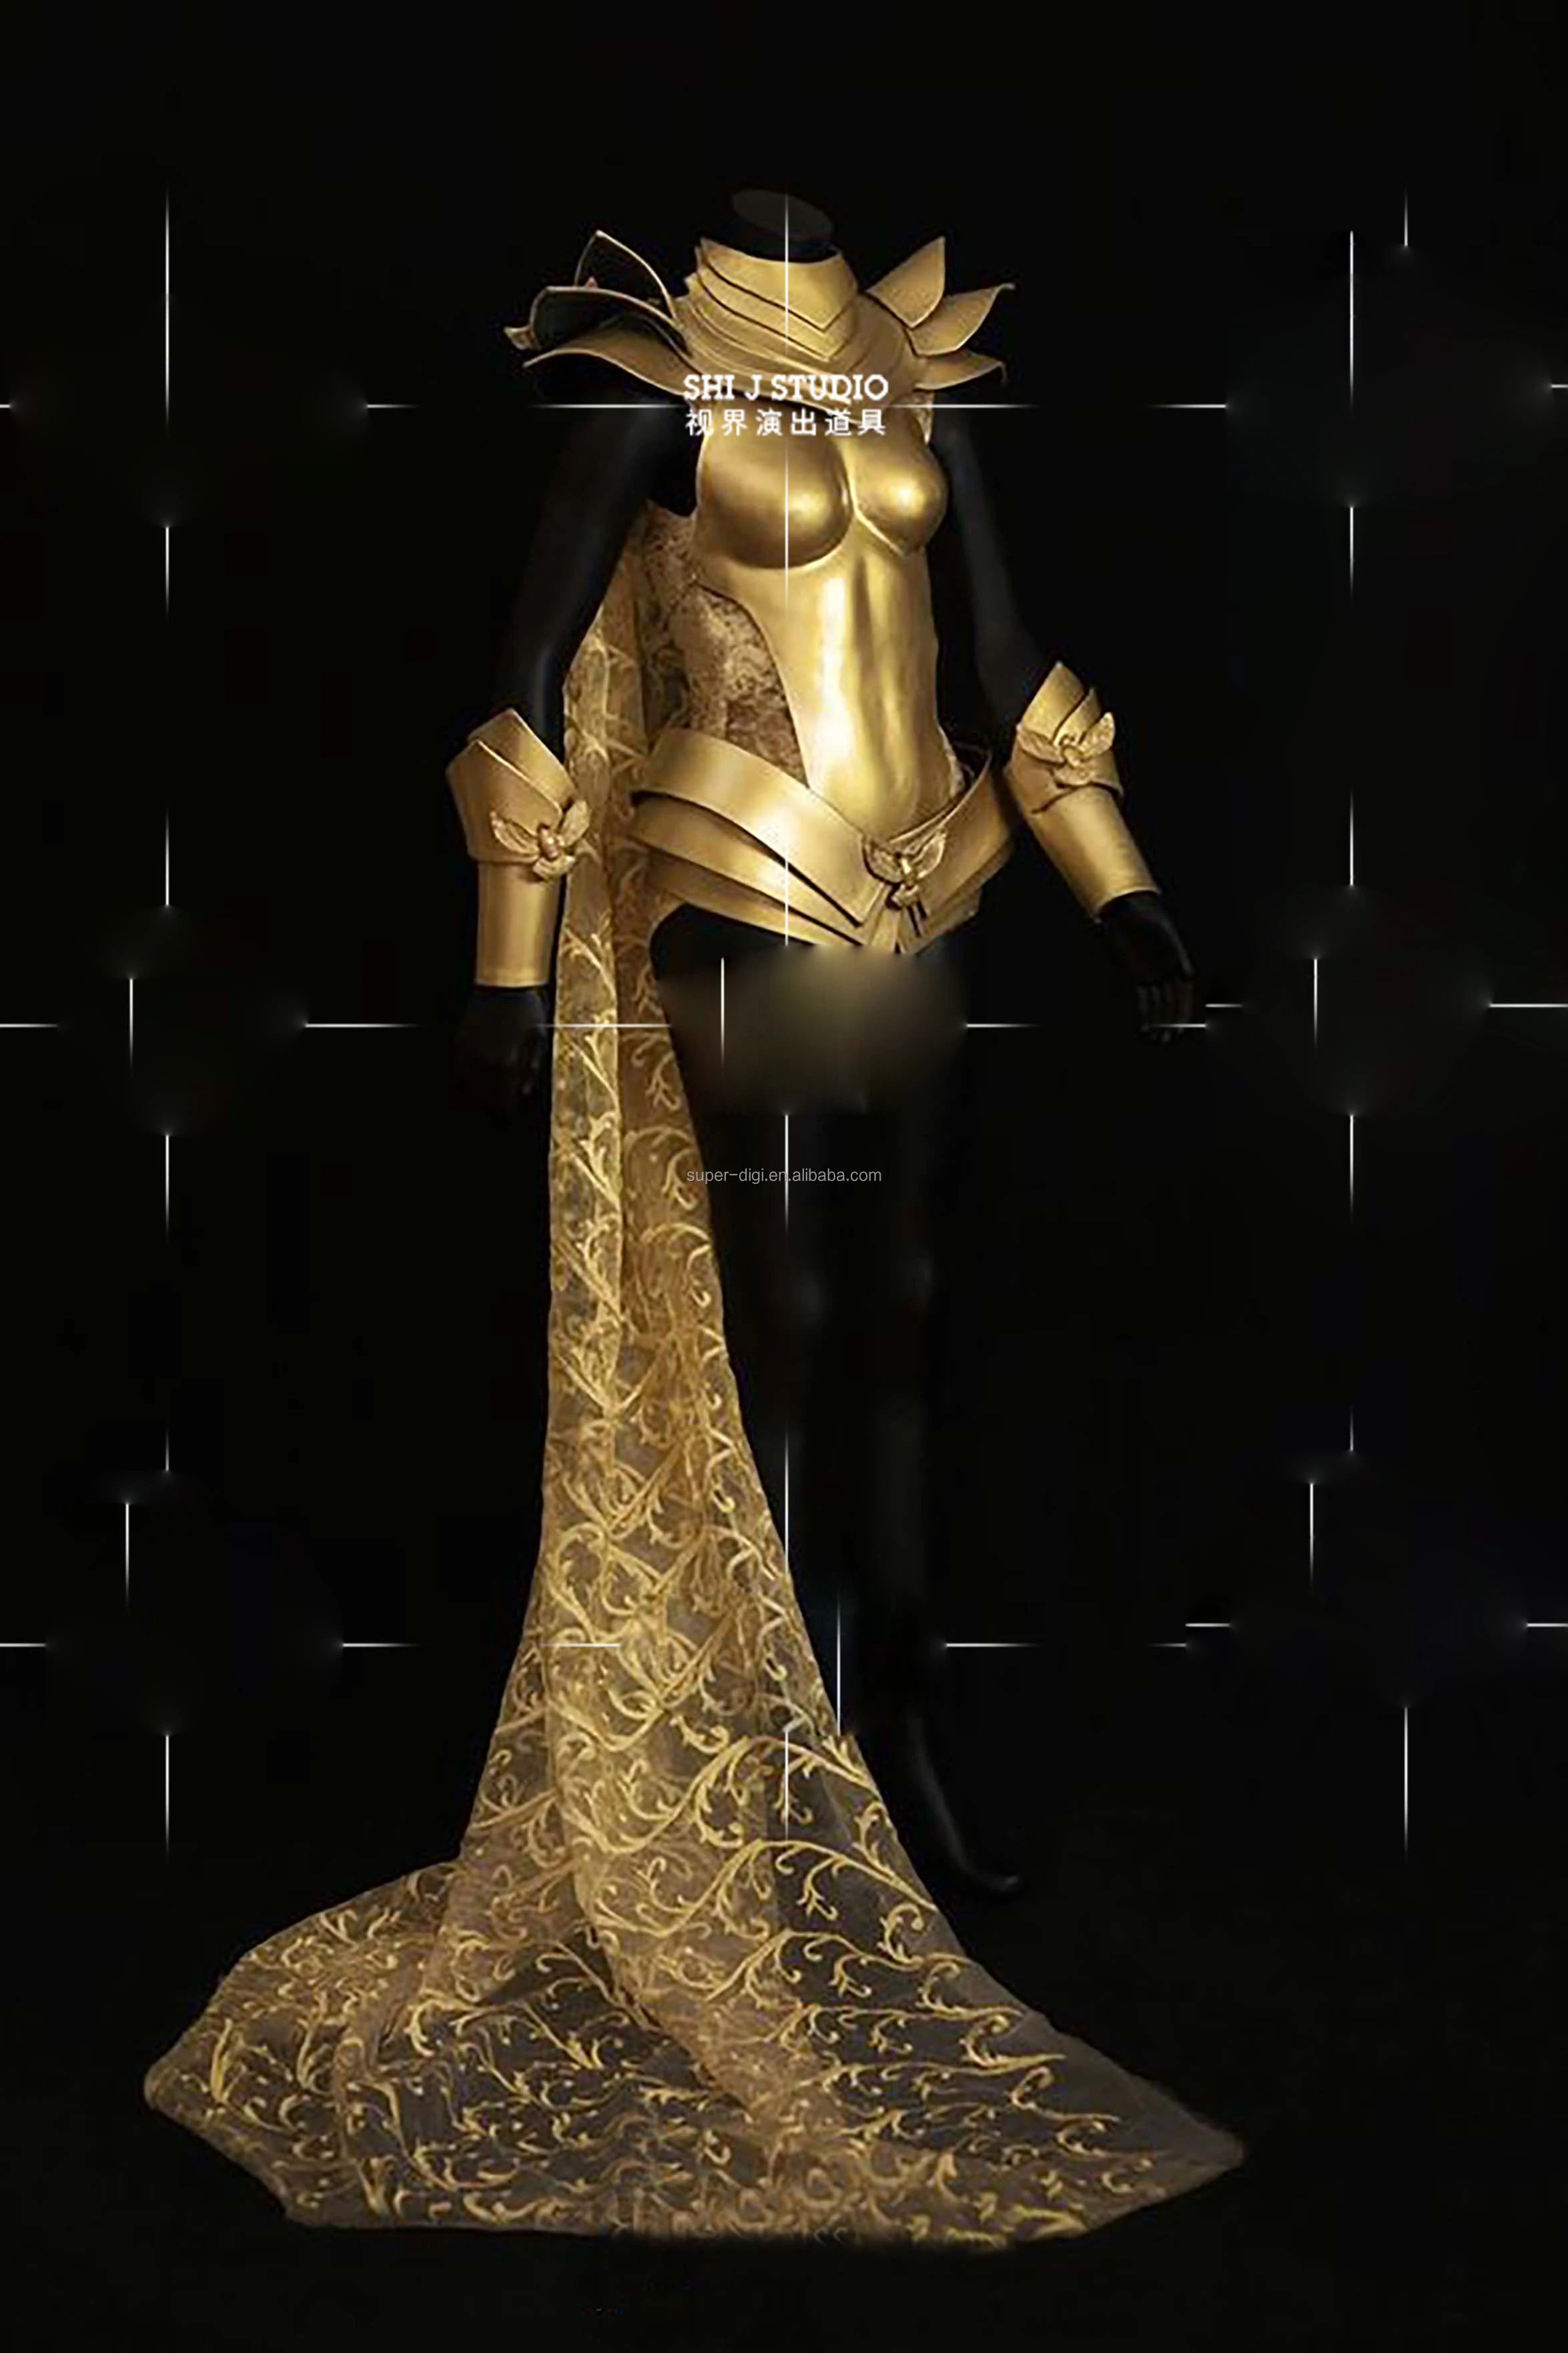 real gold armor